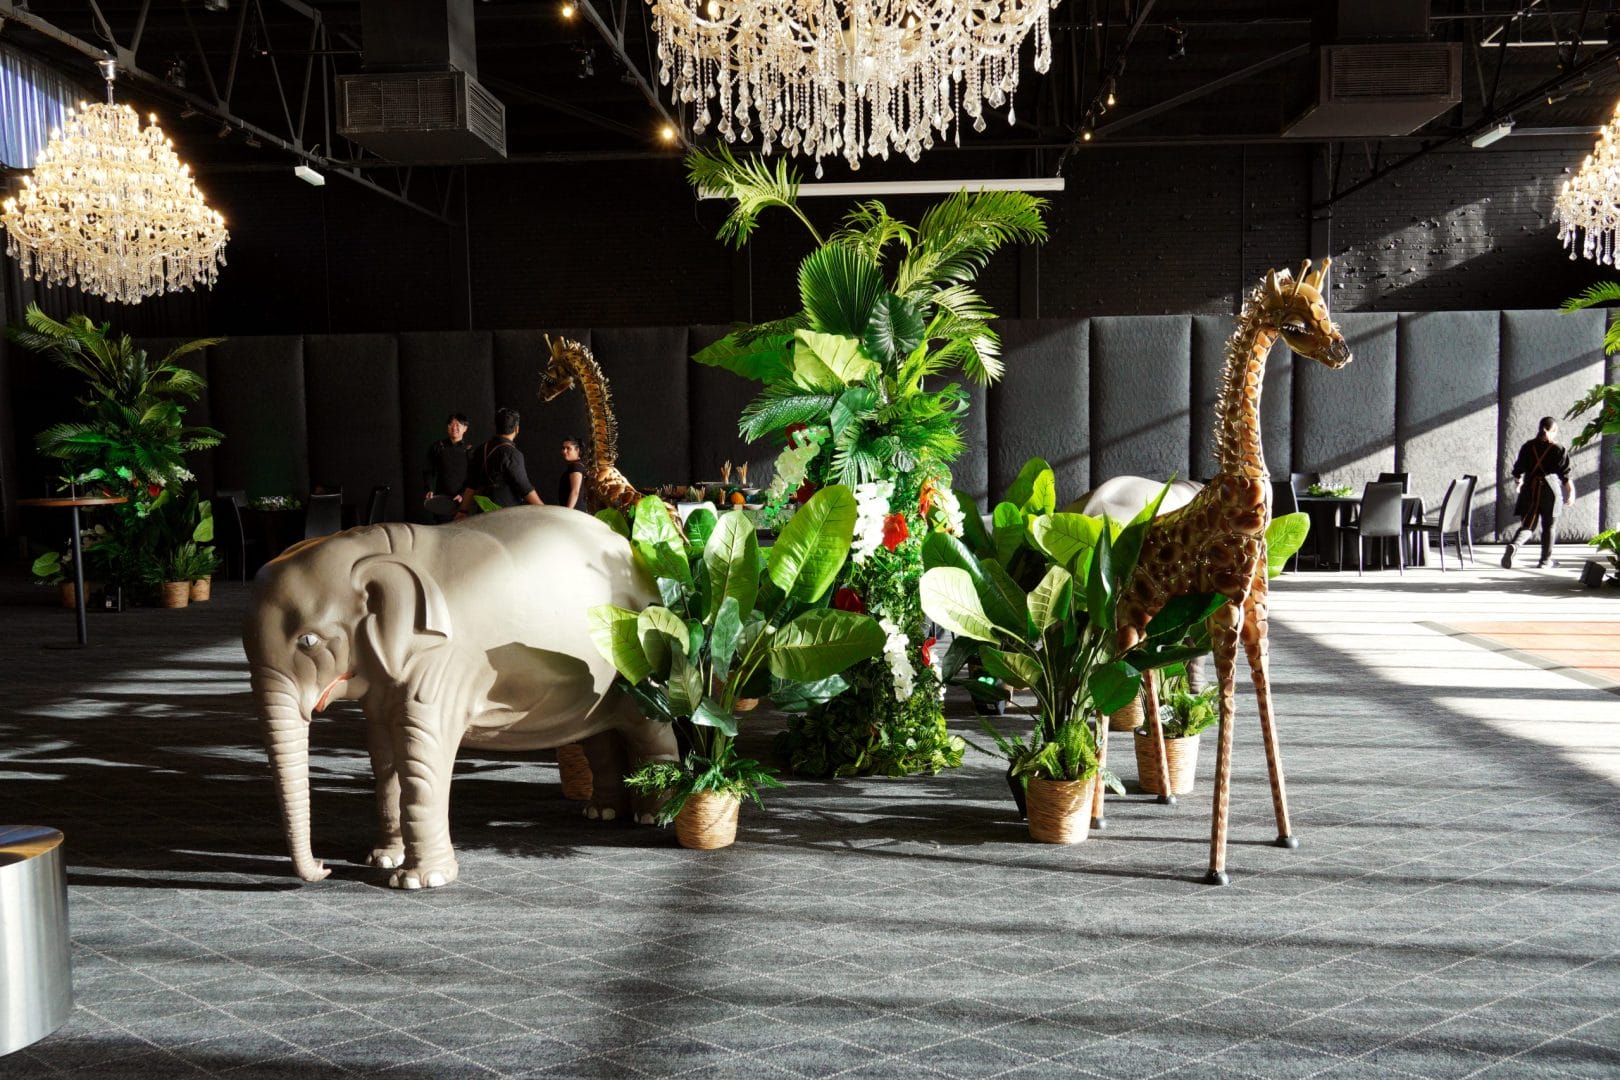 Animal props and greenery